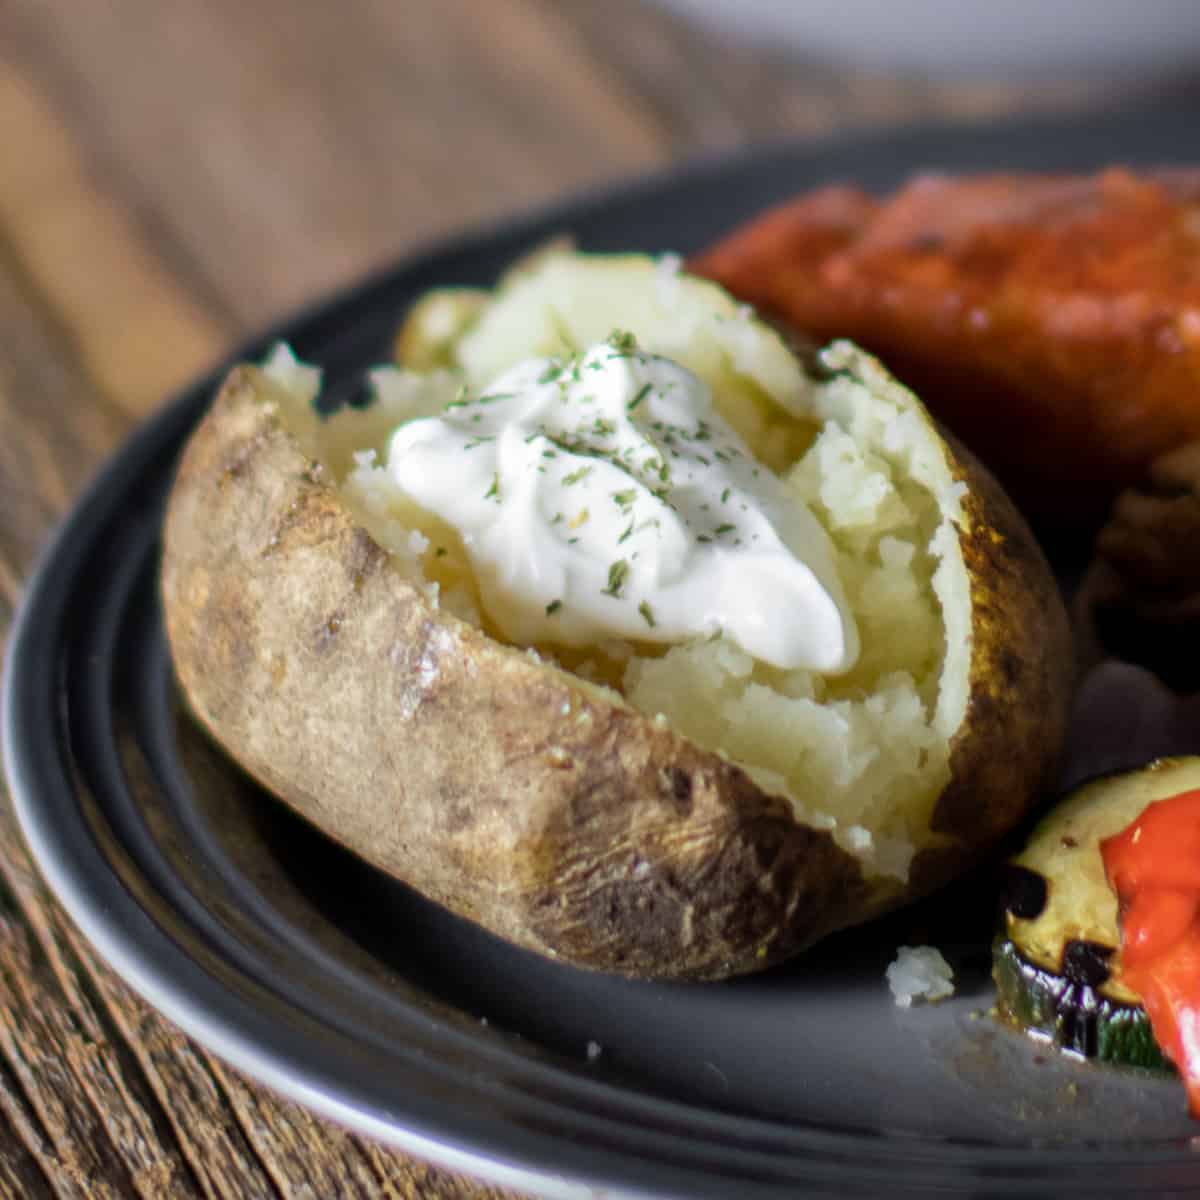 A baked potato on a plate split open with a dollop of sour cream.